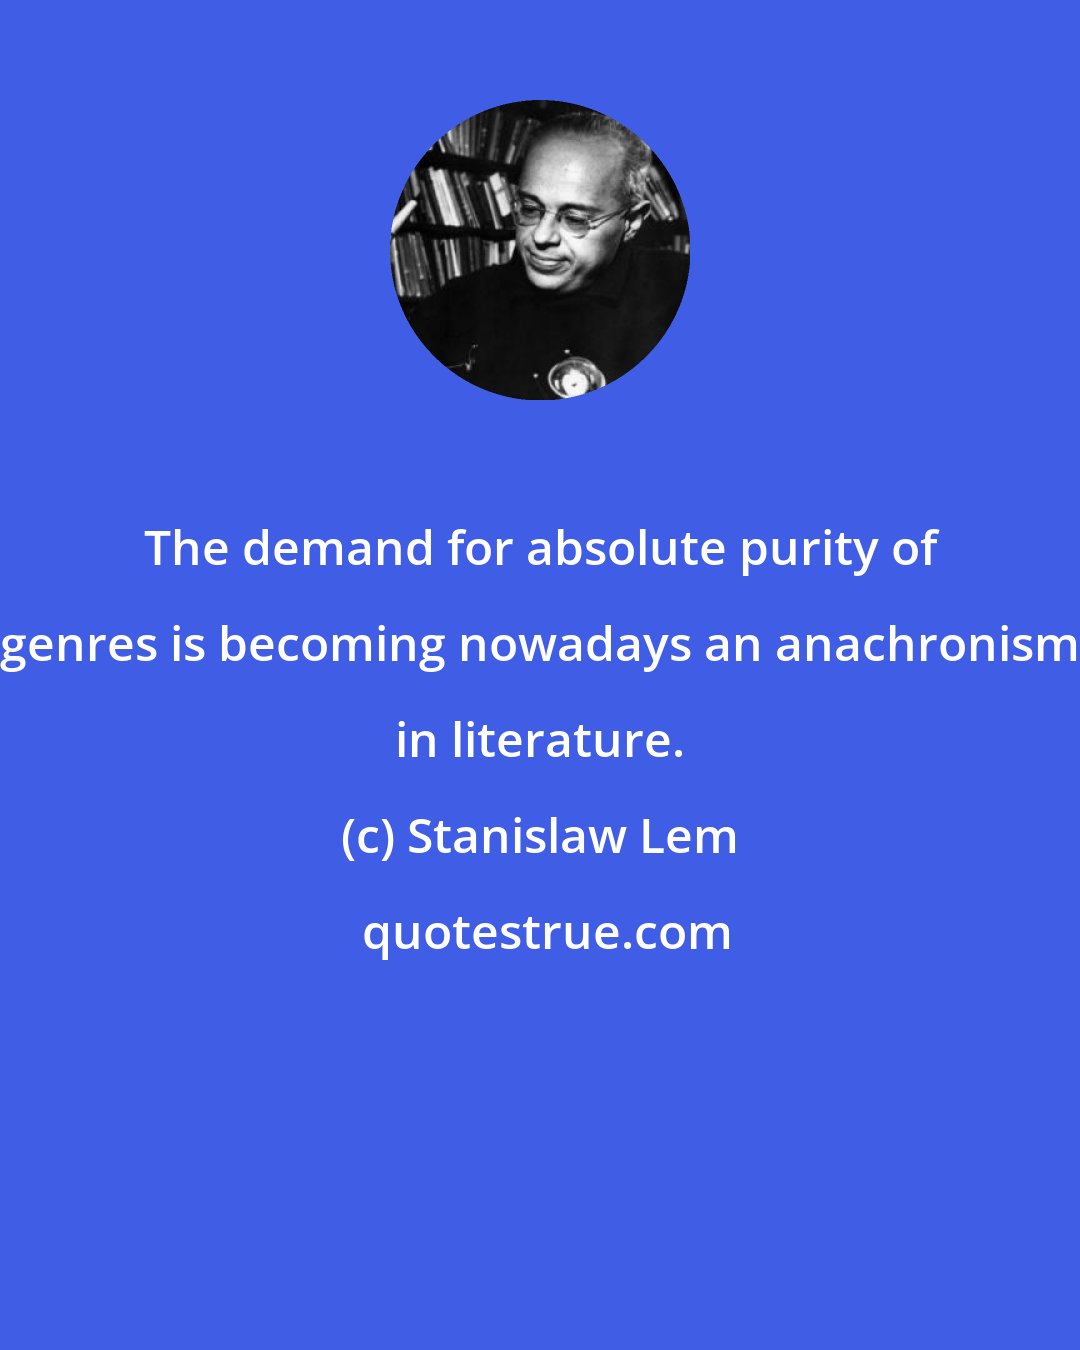 Stanislaw Lem: The demand for absolute purity of genres is becoming nowadays an anachronism in literature.